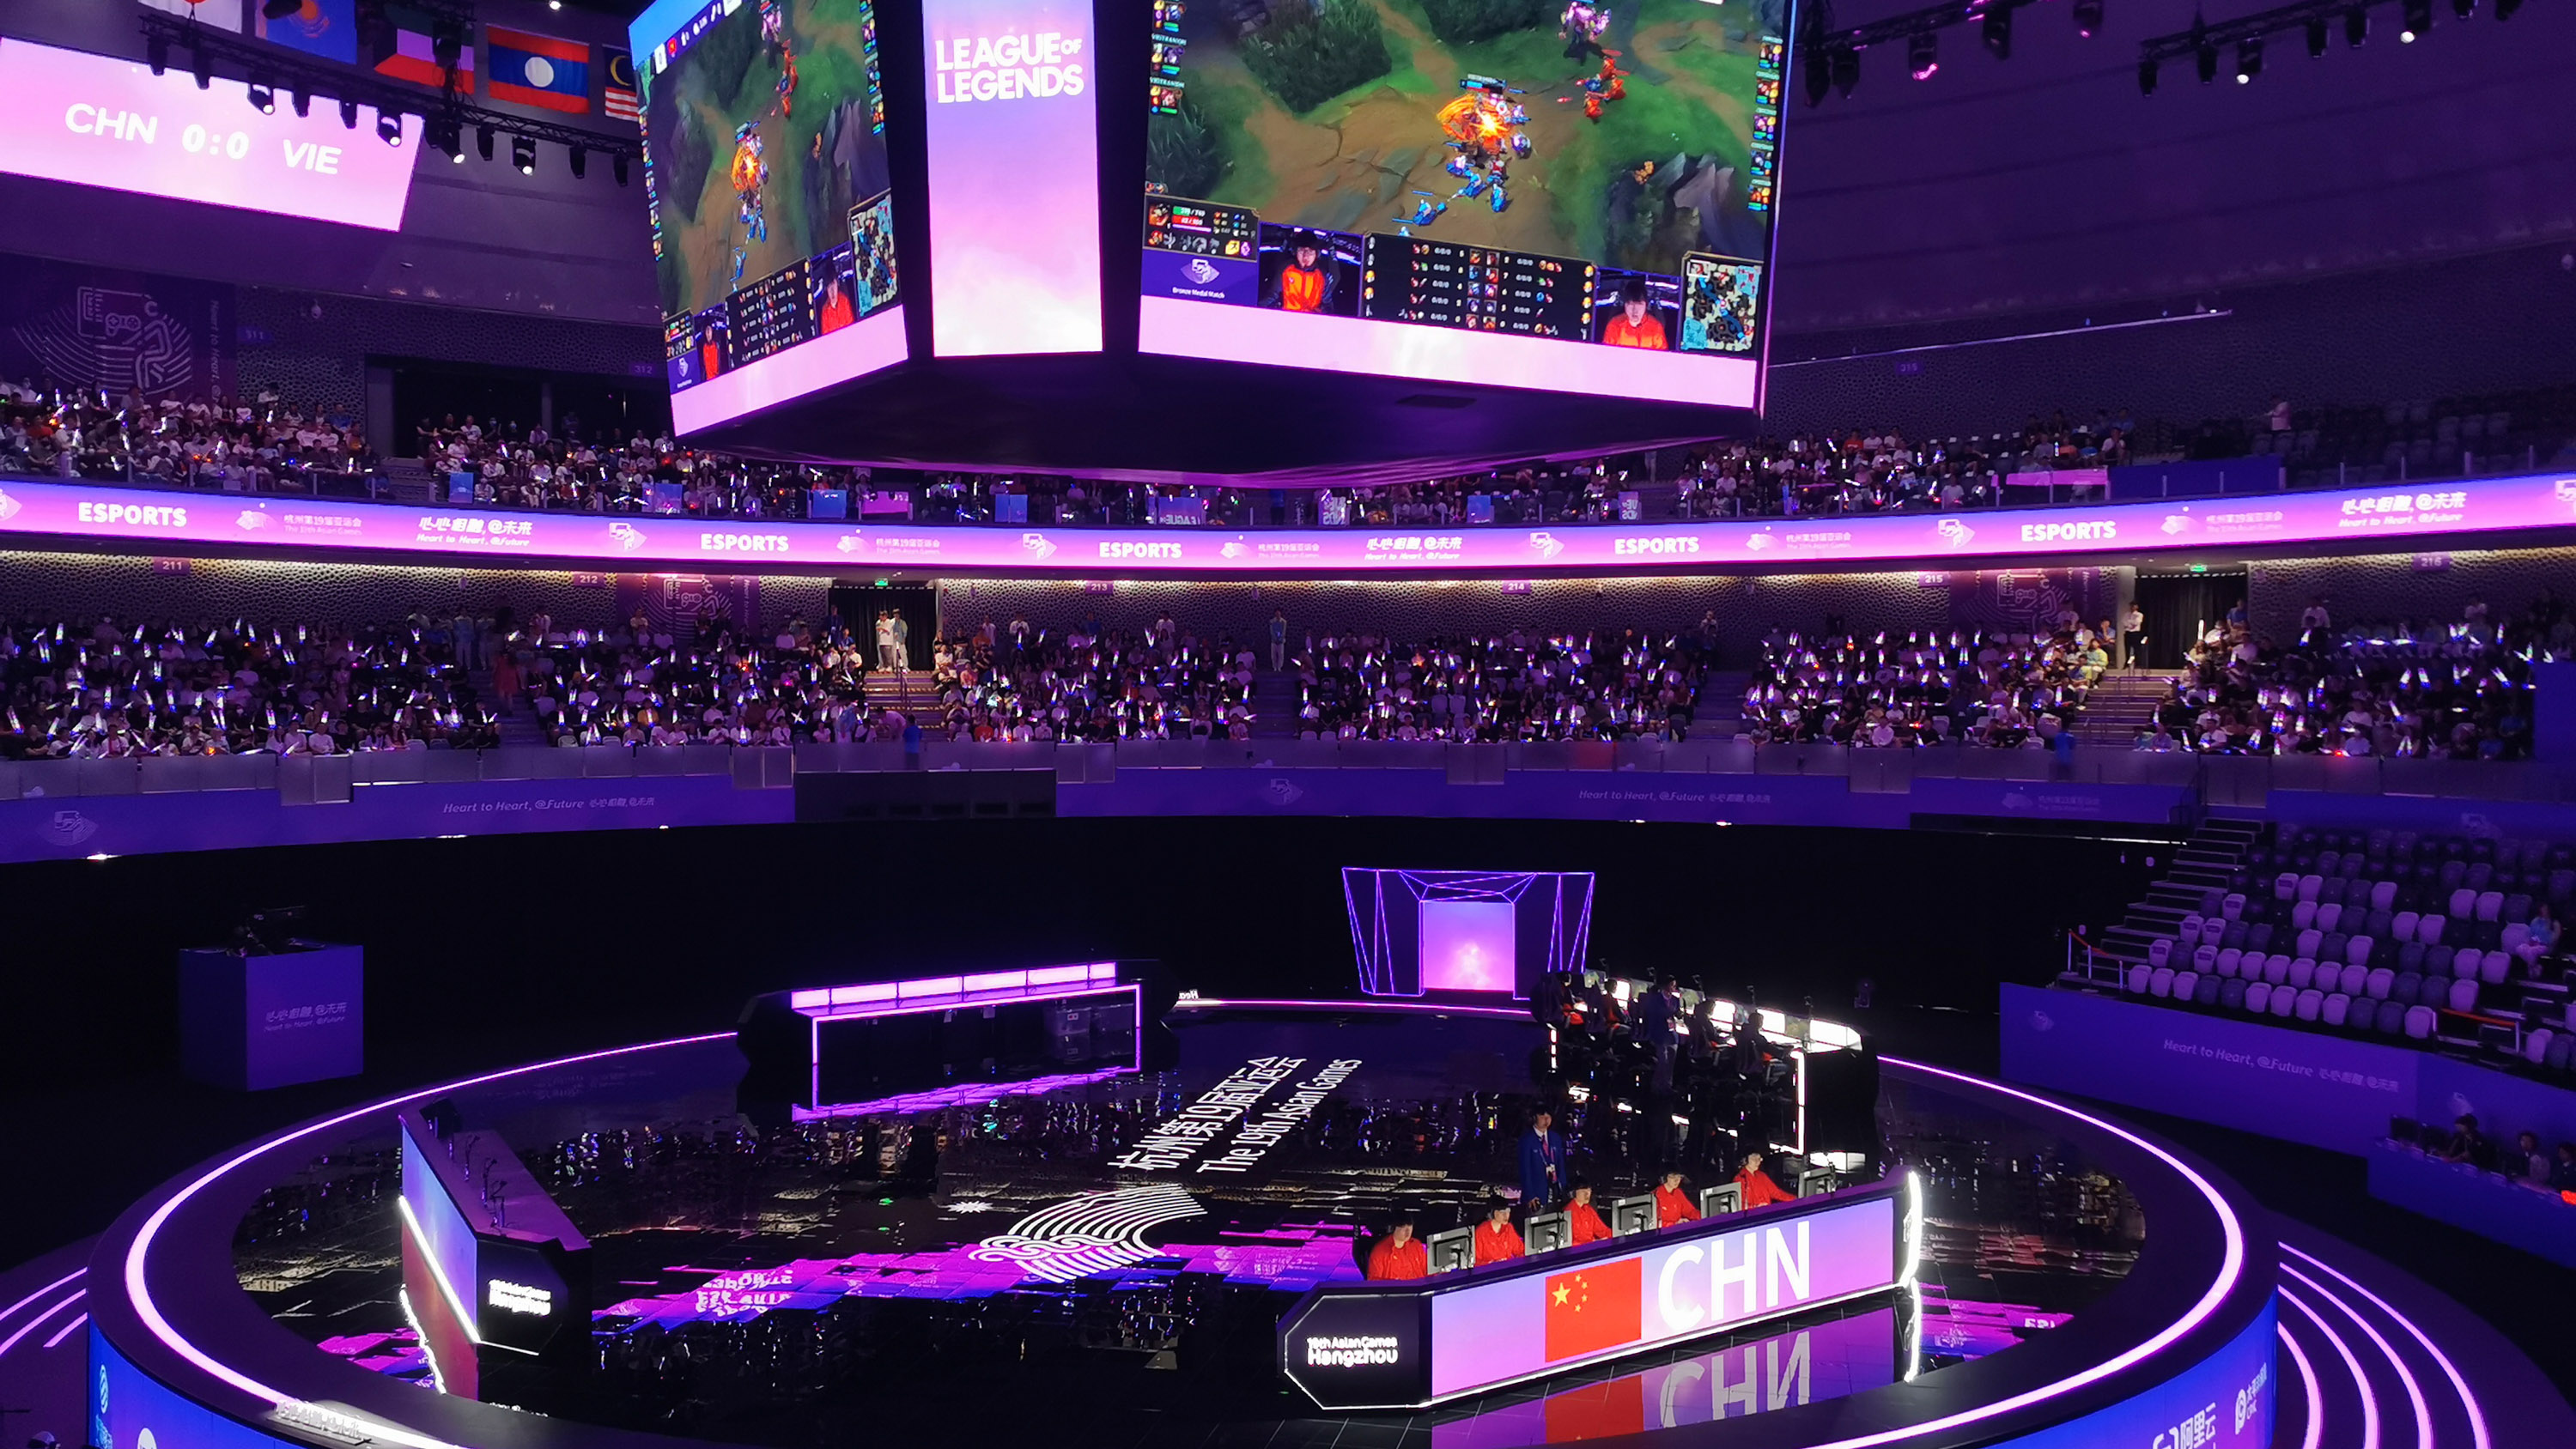 Team China plays League of Lengends versus Vietnam in the arena